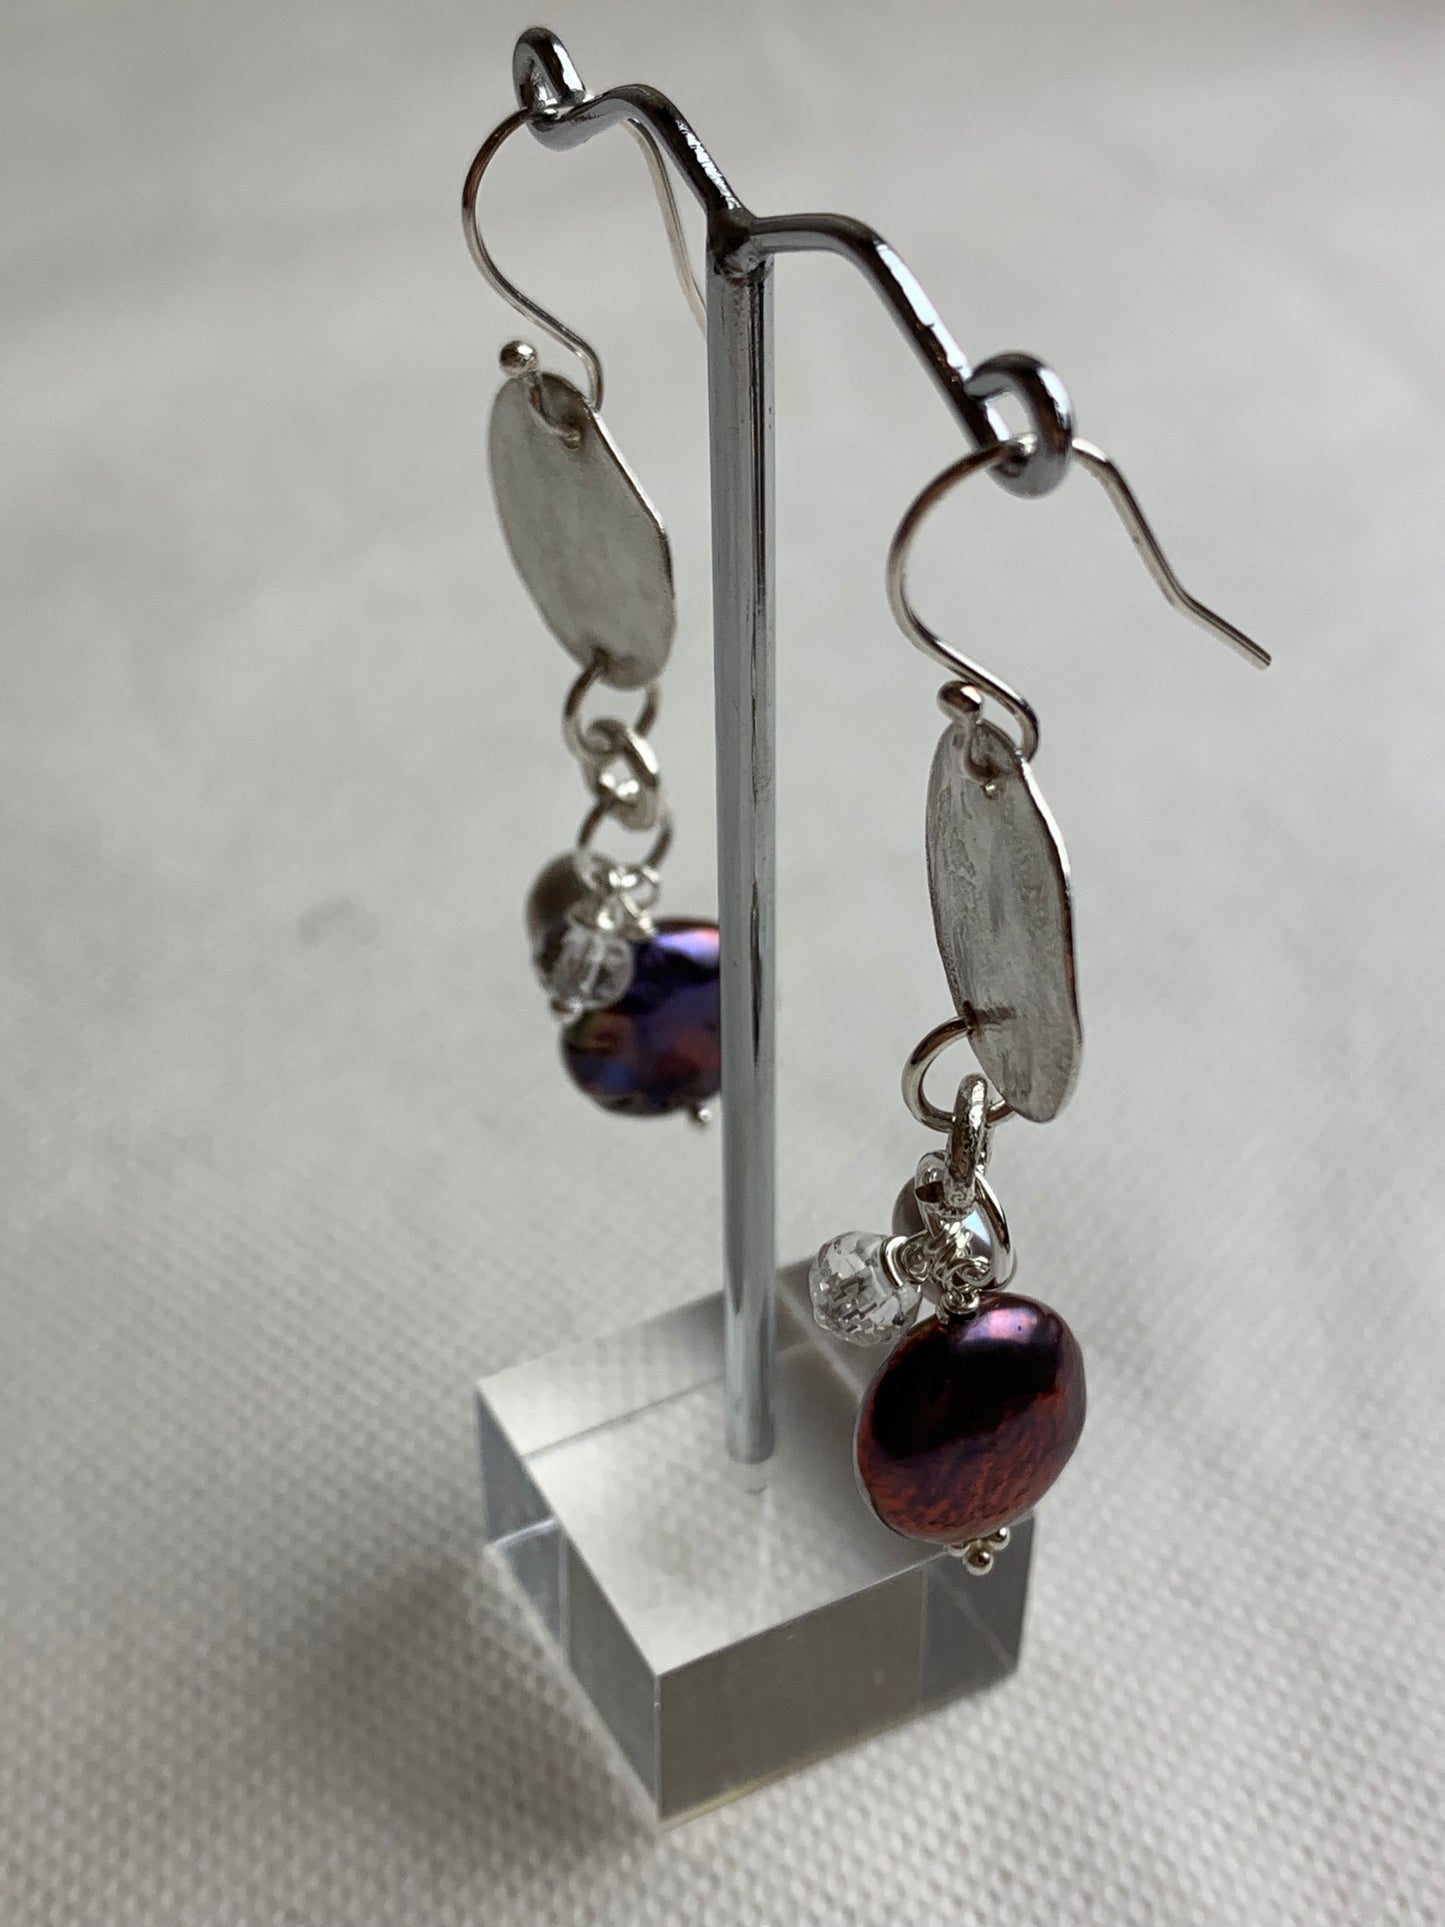 Palmer, Sarah - Drop Earrings with Pearls & Rock Crystals